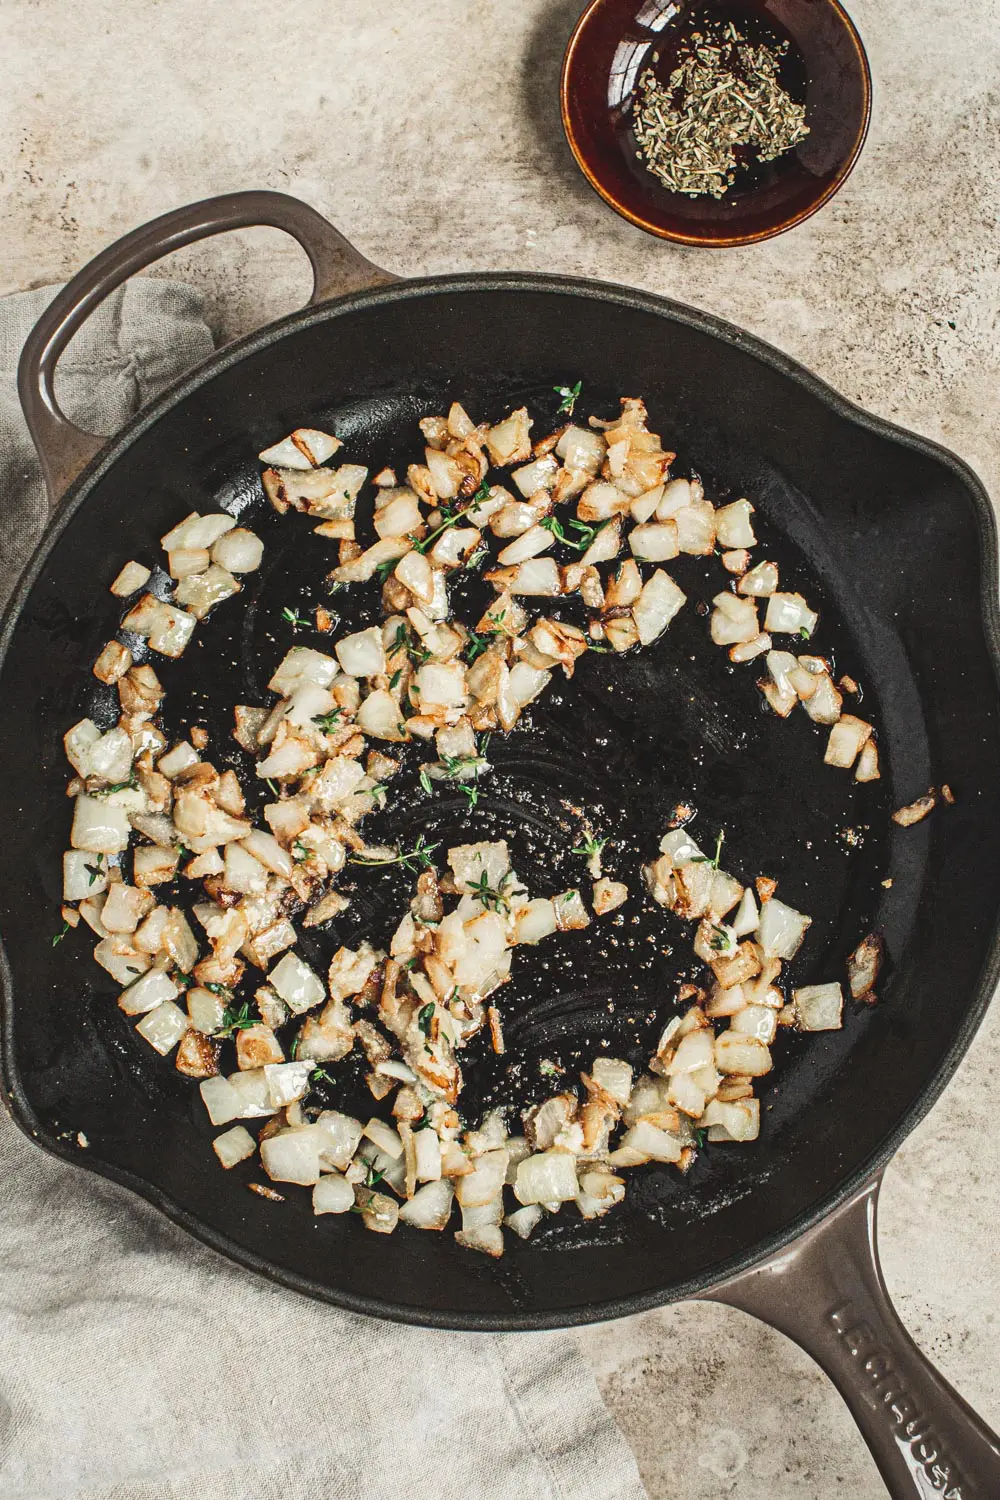 Sautéed onions with fresh thyme in an iron skillet.